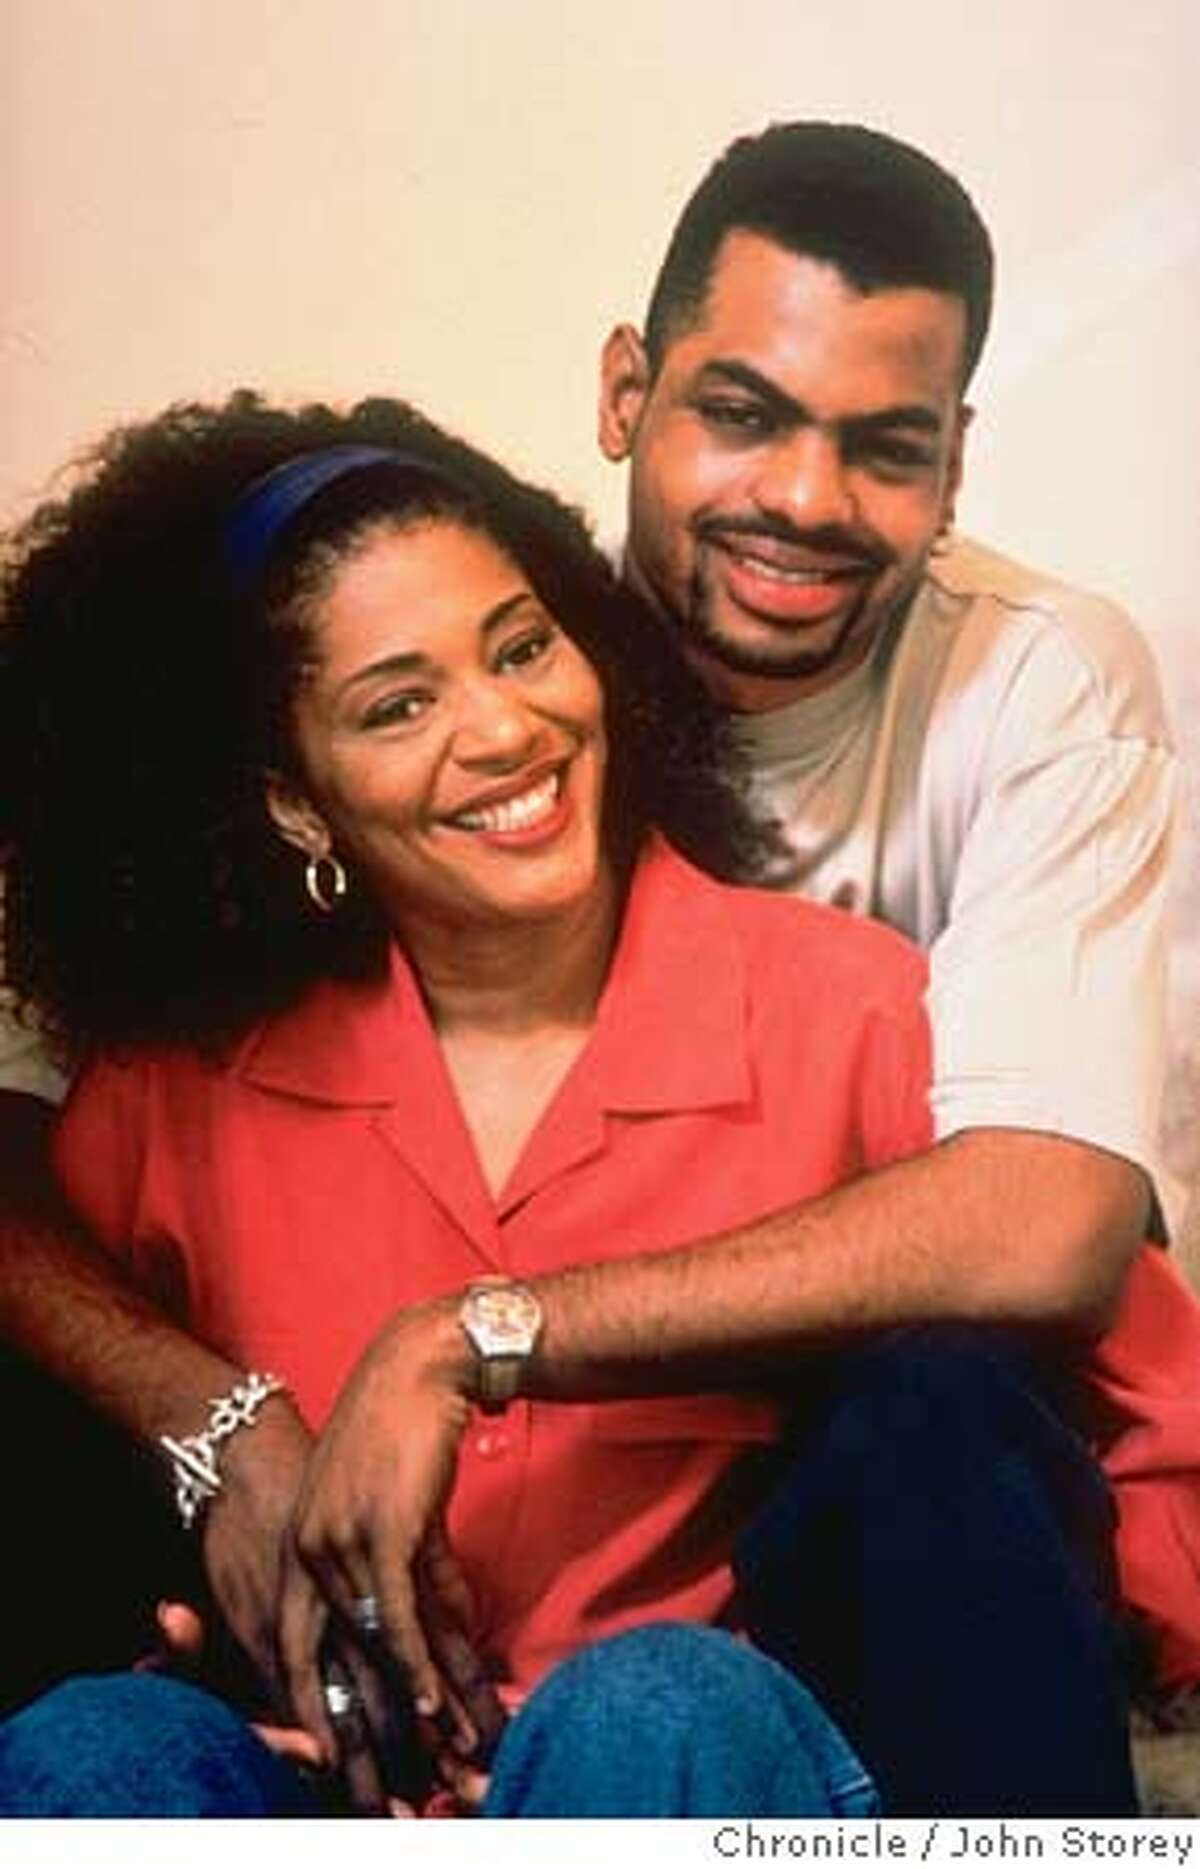 Caption for M&R story 6/26/05: Author Terry McMillan and husband Jonathan Plummer in happier times. Original caption from 1996: Author Terry McMillan, 44, cuddling with her 21-yr-old live-in lover, college student Jonatahan Plummer. (Photo by John Storey//Time Life Pictures/Getty Images)